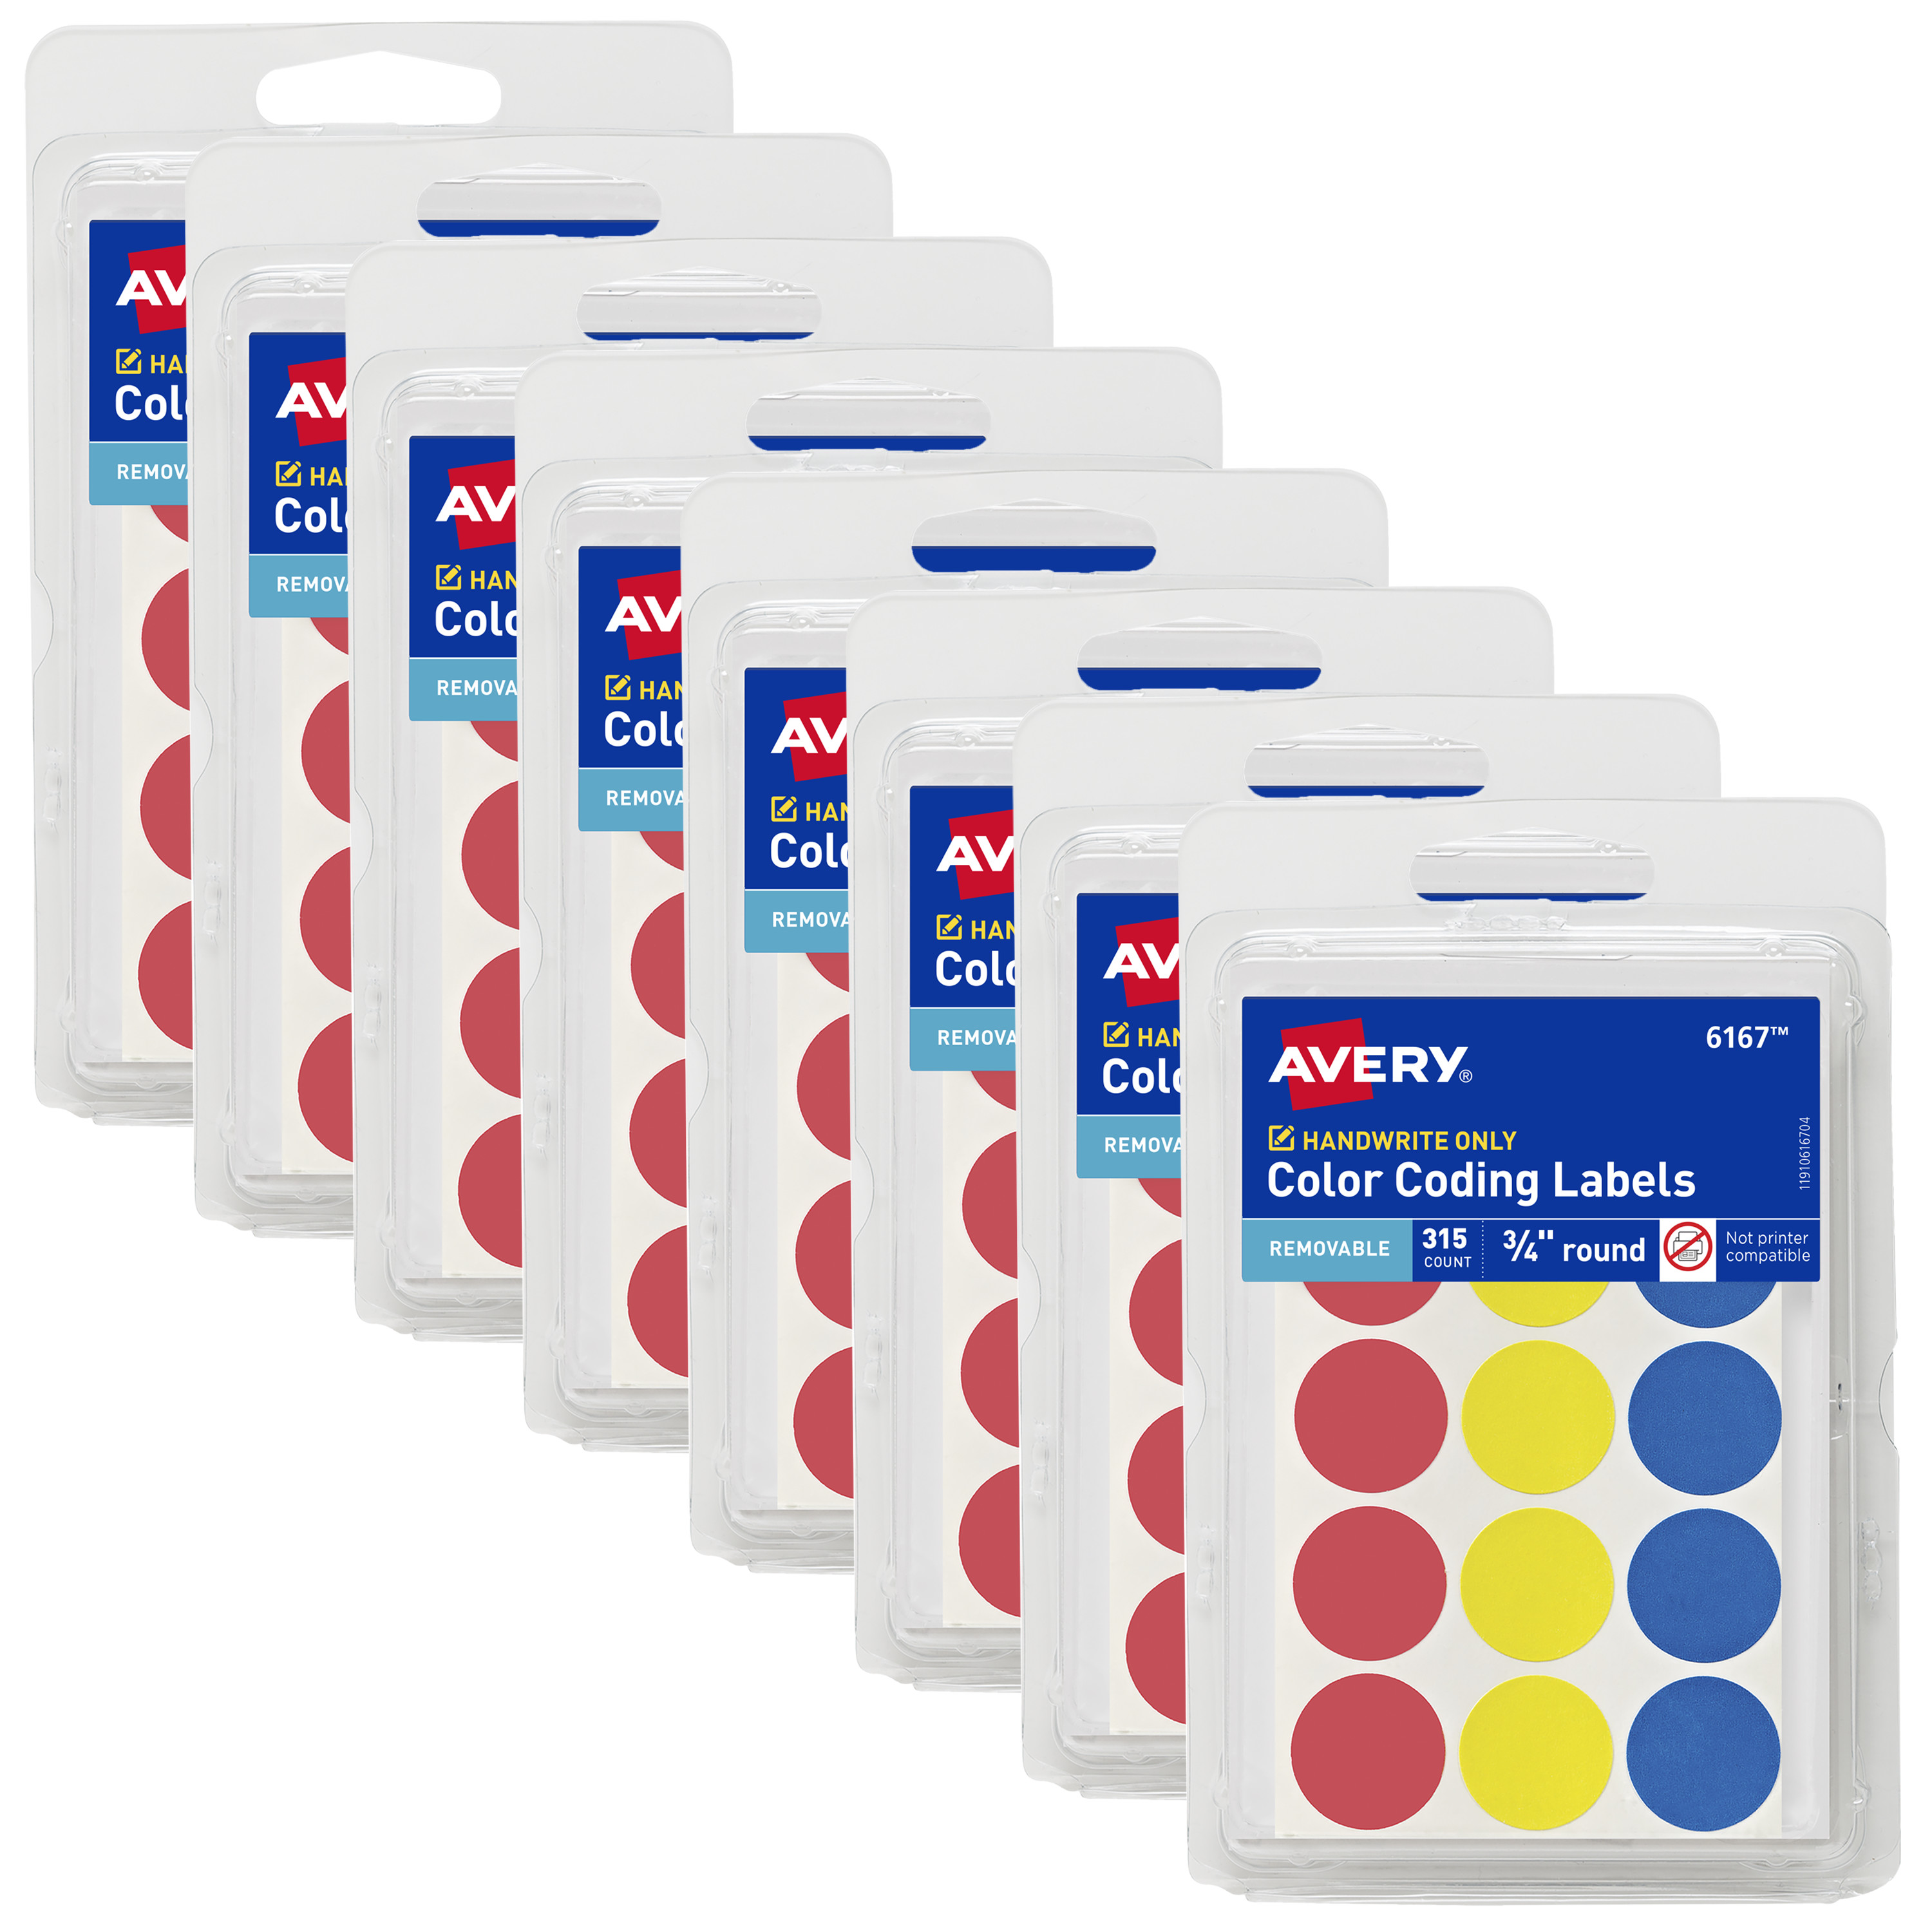 Avery Color-Coding Removable Labels, 3/4 Inch Round Labels, Assorted  Colors, Non-Printable, 8 Packs, 2,520 Dot Stickers Total (21926)